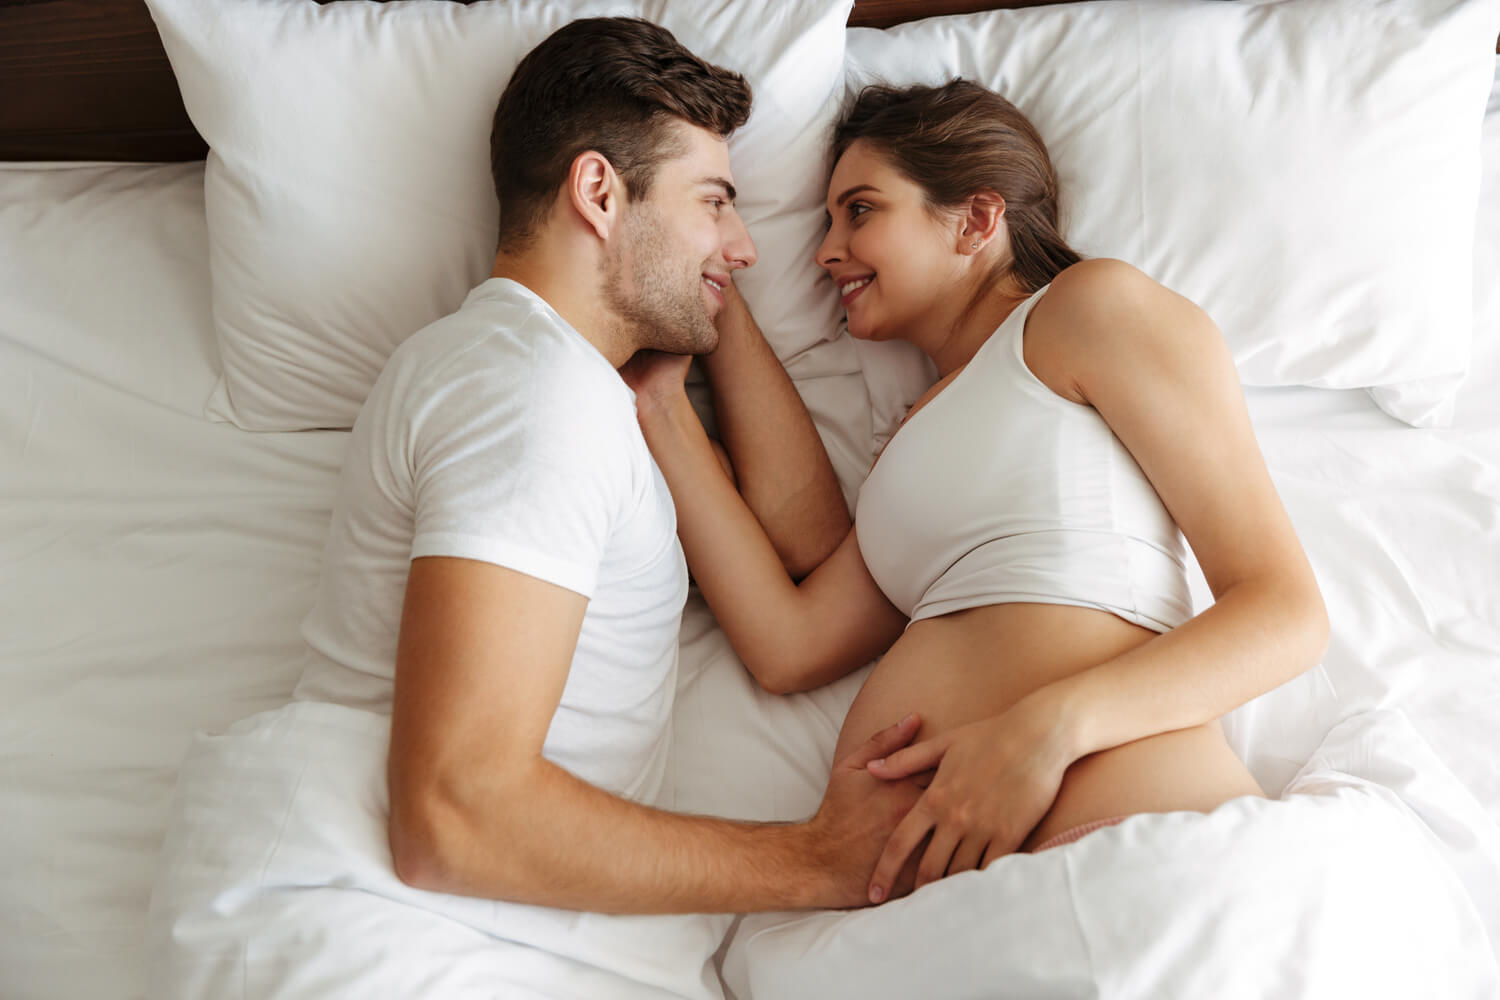 Is orgasm safe in first trimester